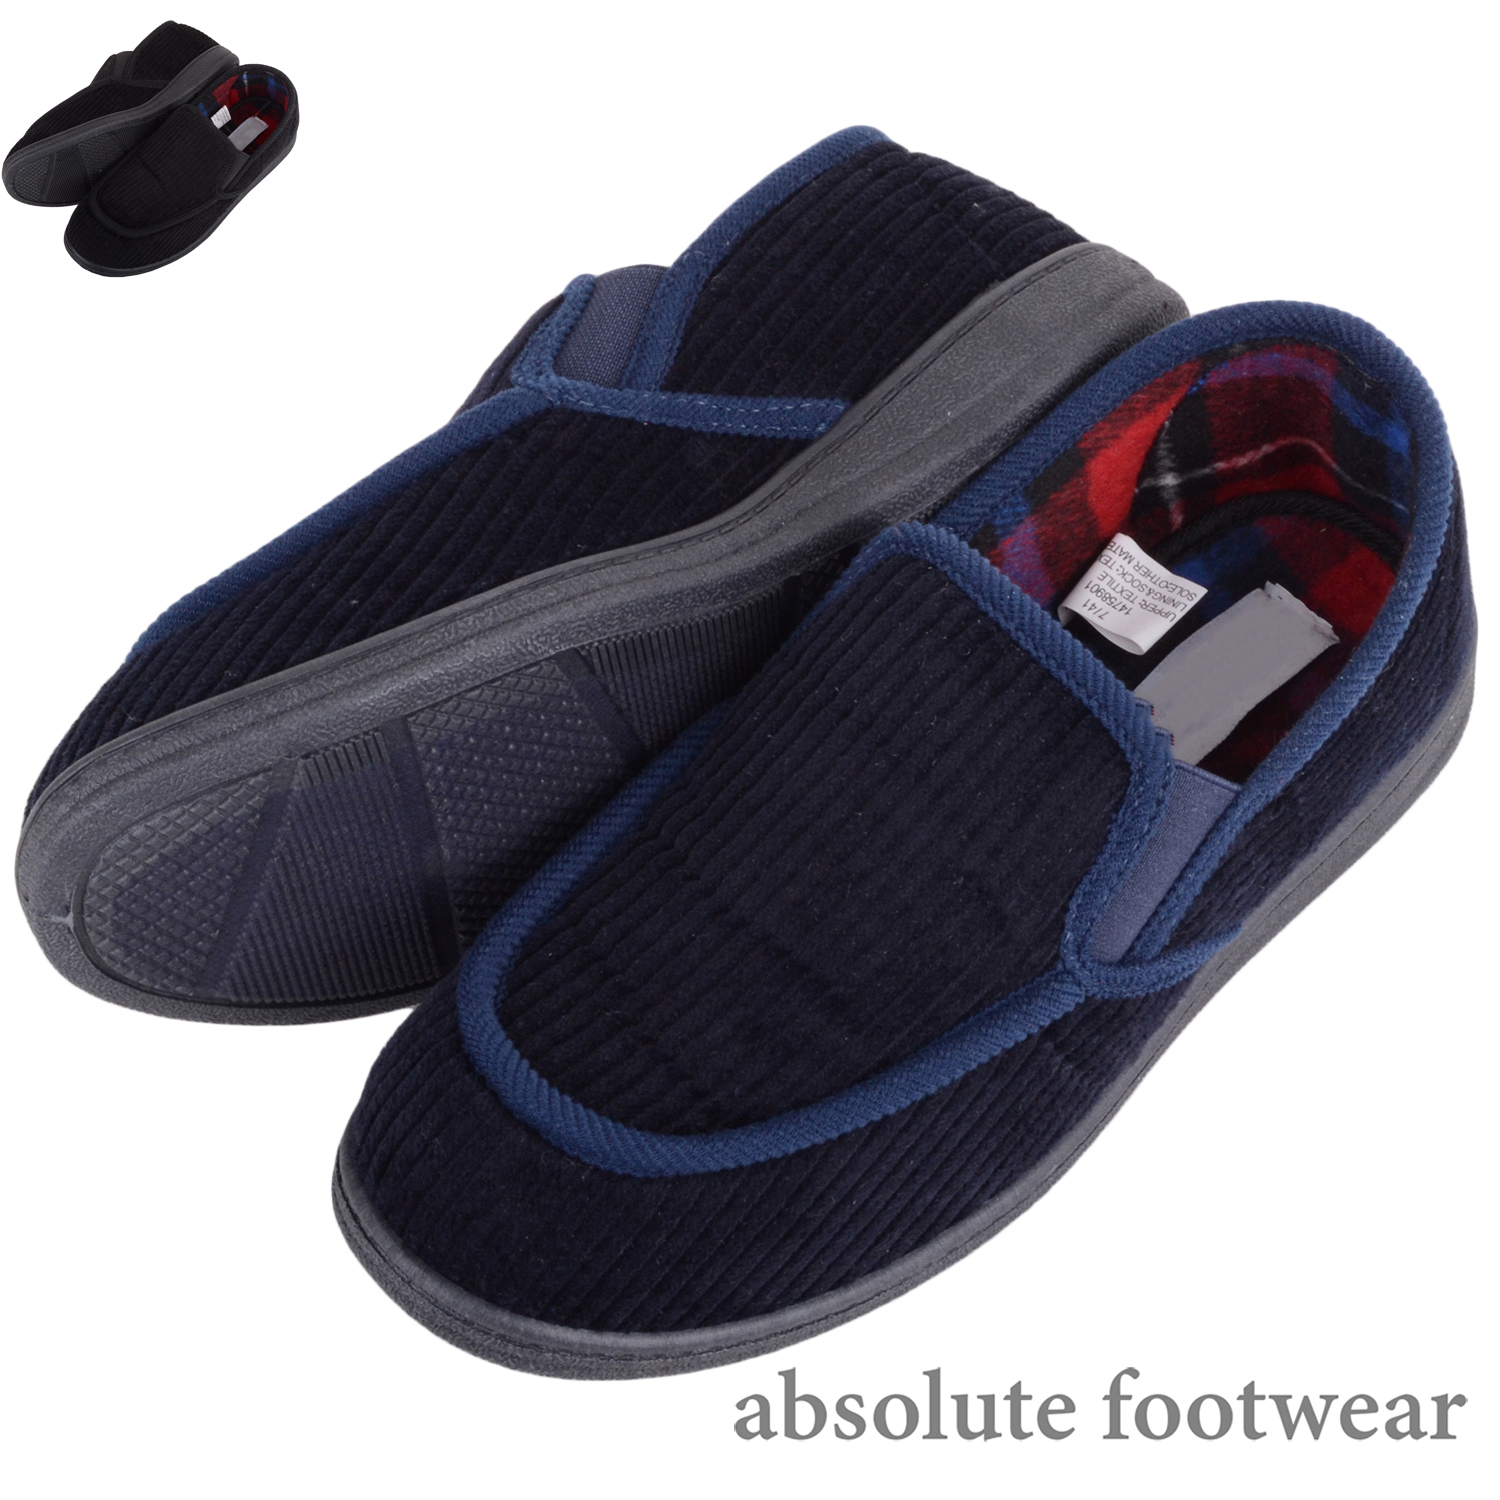 mens shoes with memory foam insole